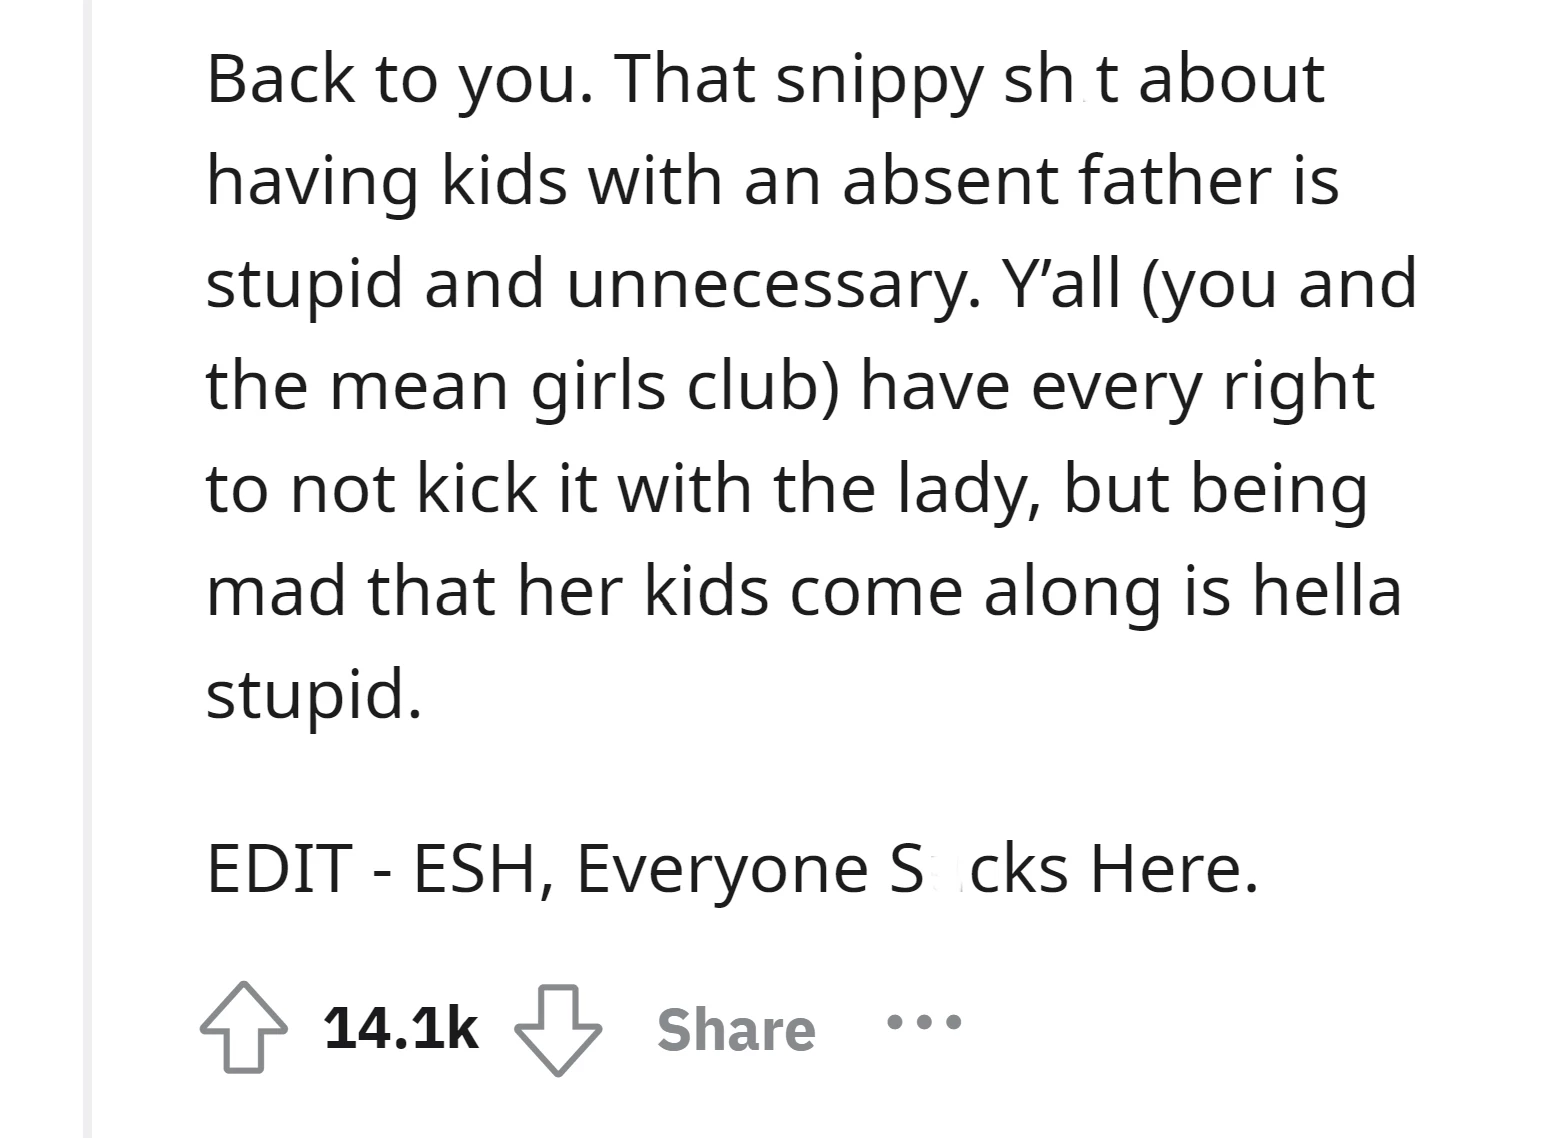 OP Doesn't Have Kids So It's Hard To Understand